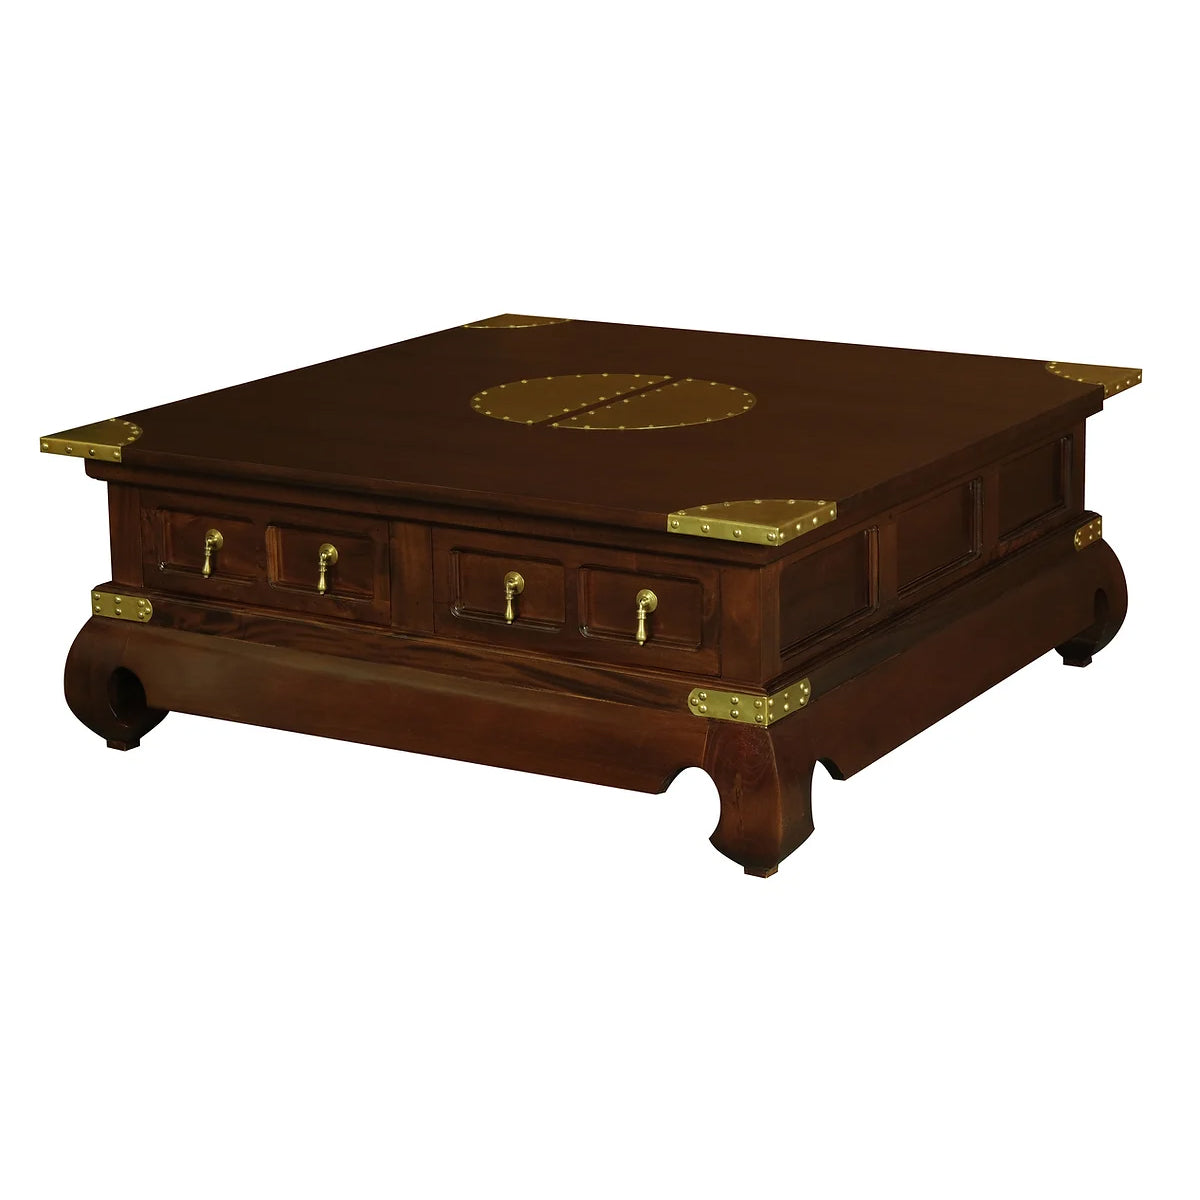 Dynasty Timber 4 Drawer Square Coffee Table - Mahogany